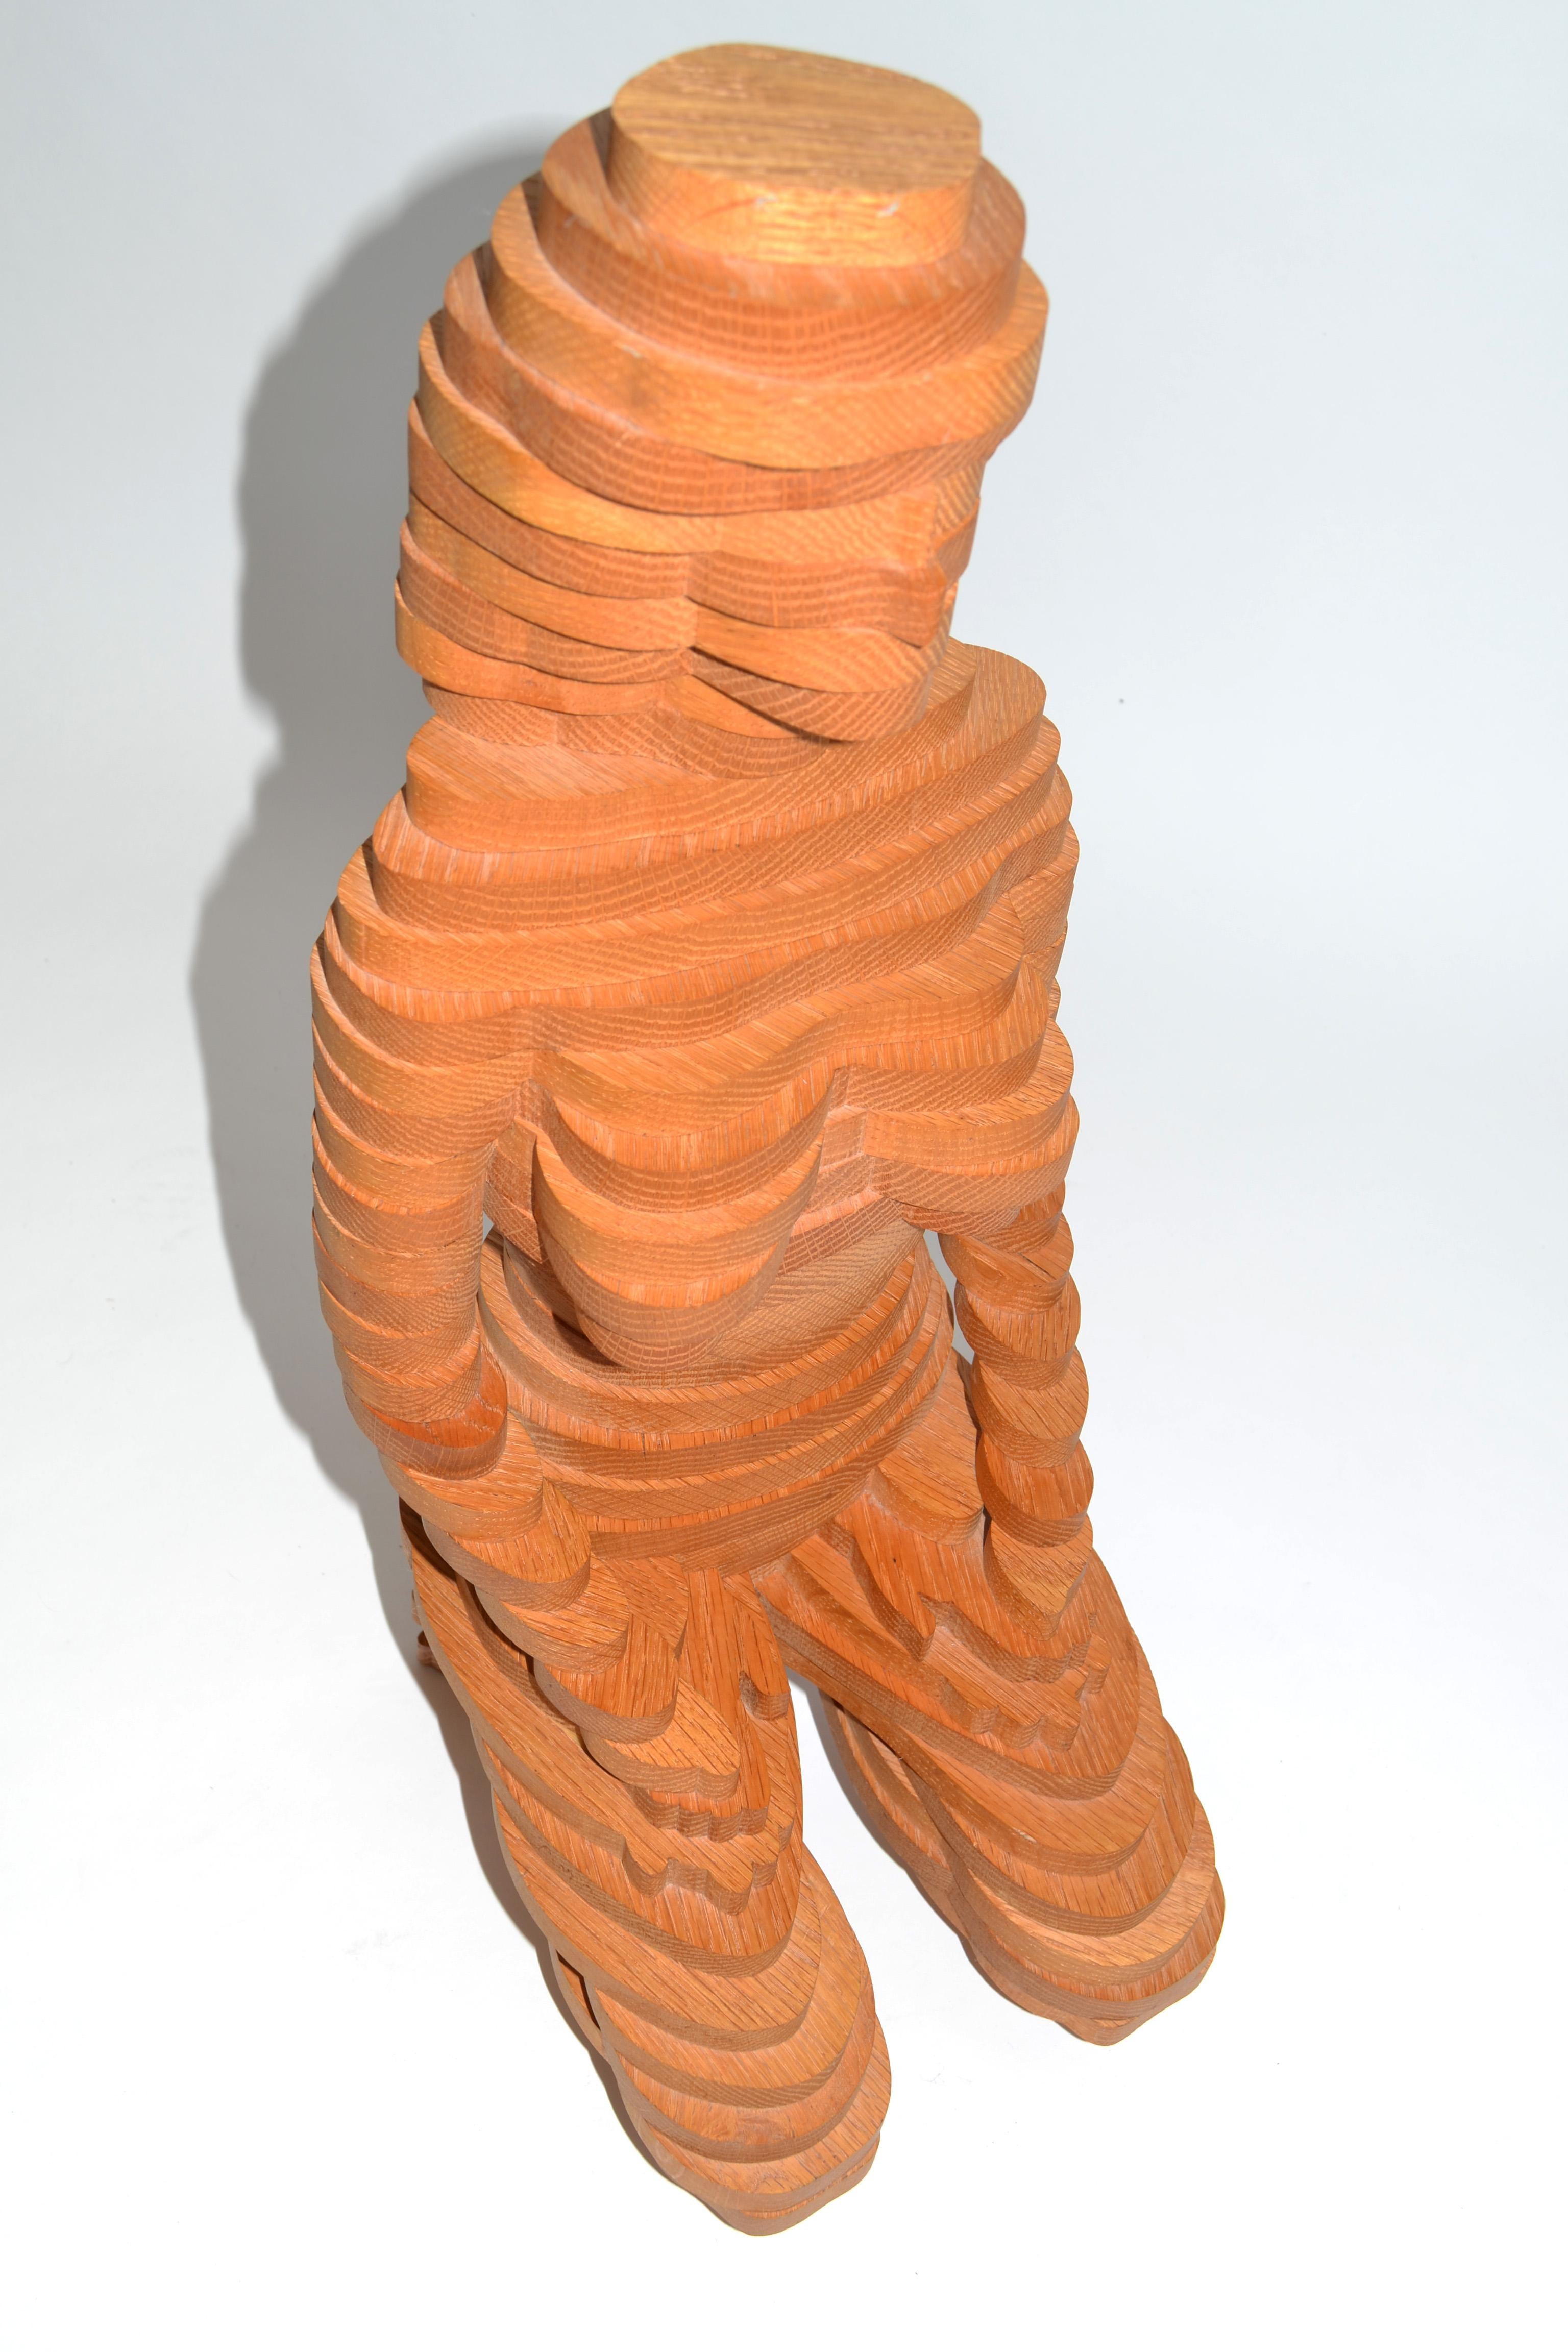 Joinery Female Sculpture in Joined Wood 3-D Cubist Surrealist by Reuben Karol, USA 1990s For Sale